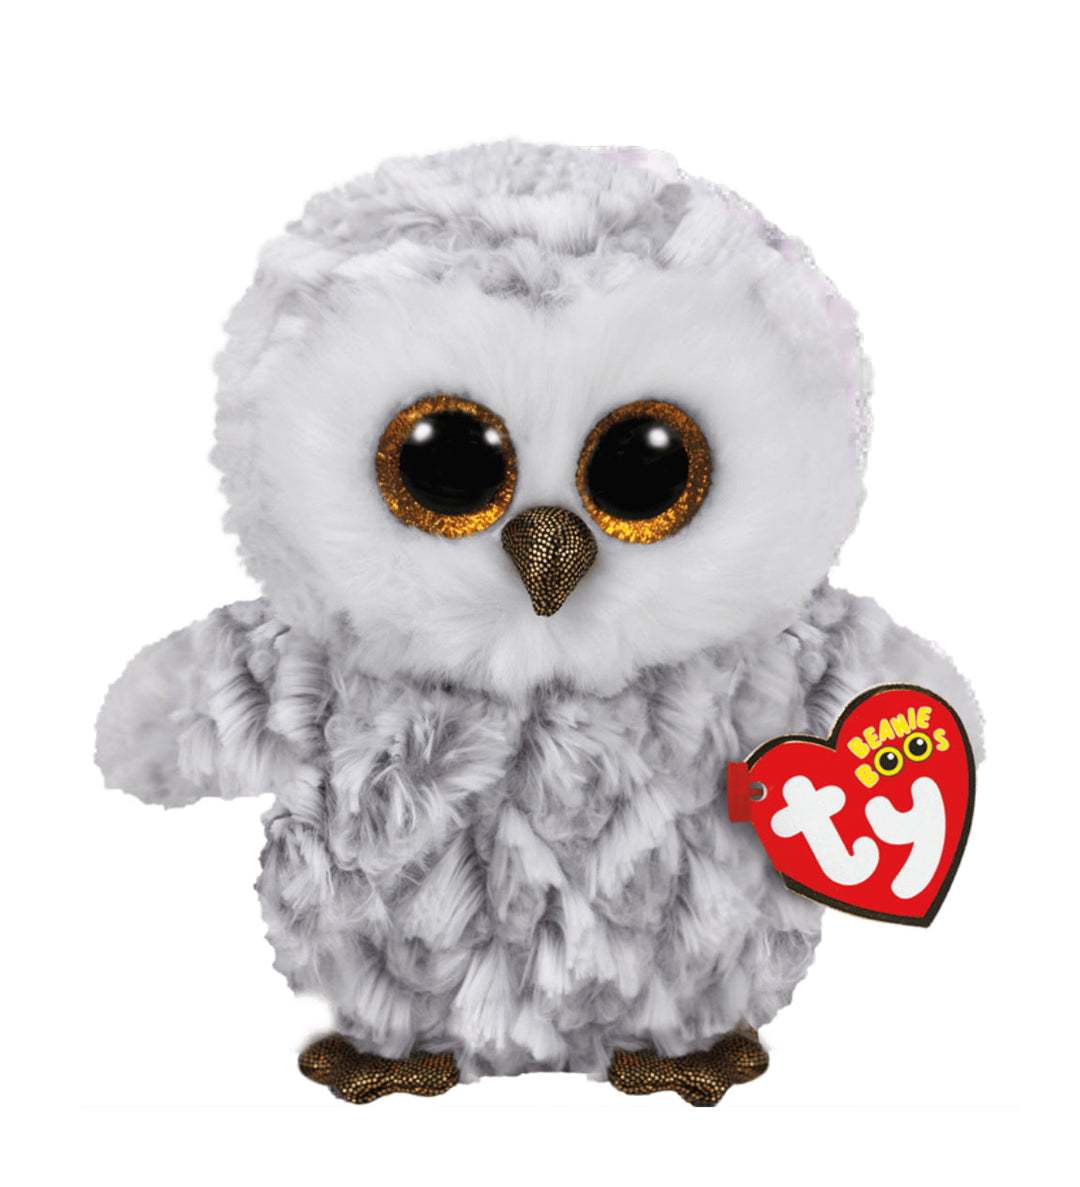 TY Medium Beanie Boos Stuffed Animal, Owlette-240 Kids-Inspired by Justeen-Women's Clothing Boutique in Chicago, Illinois